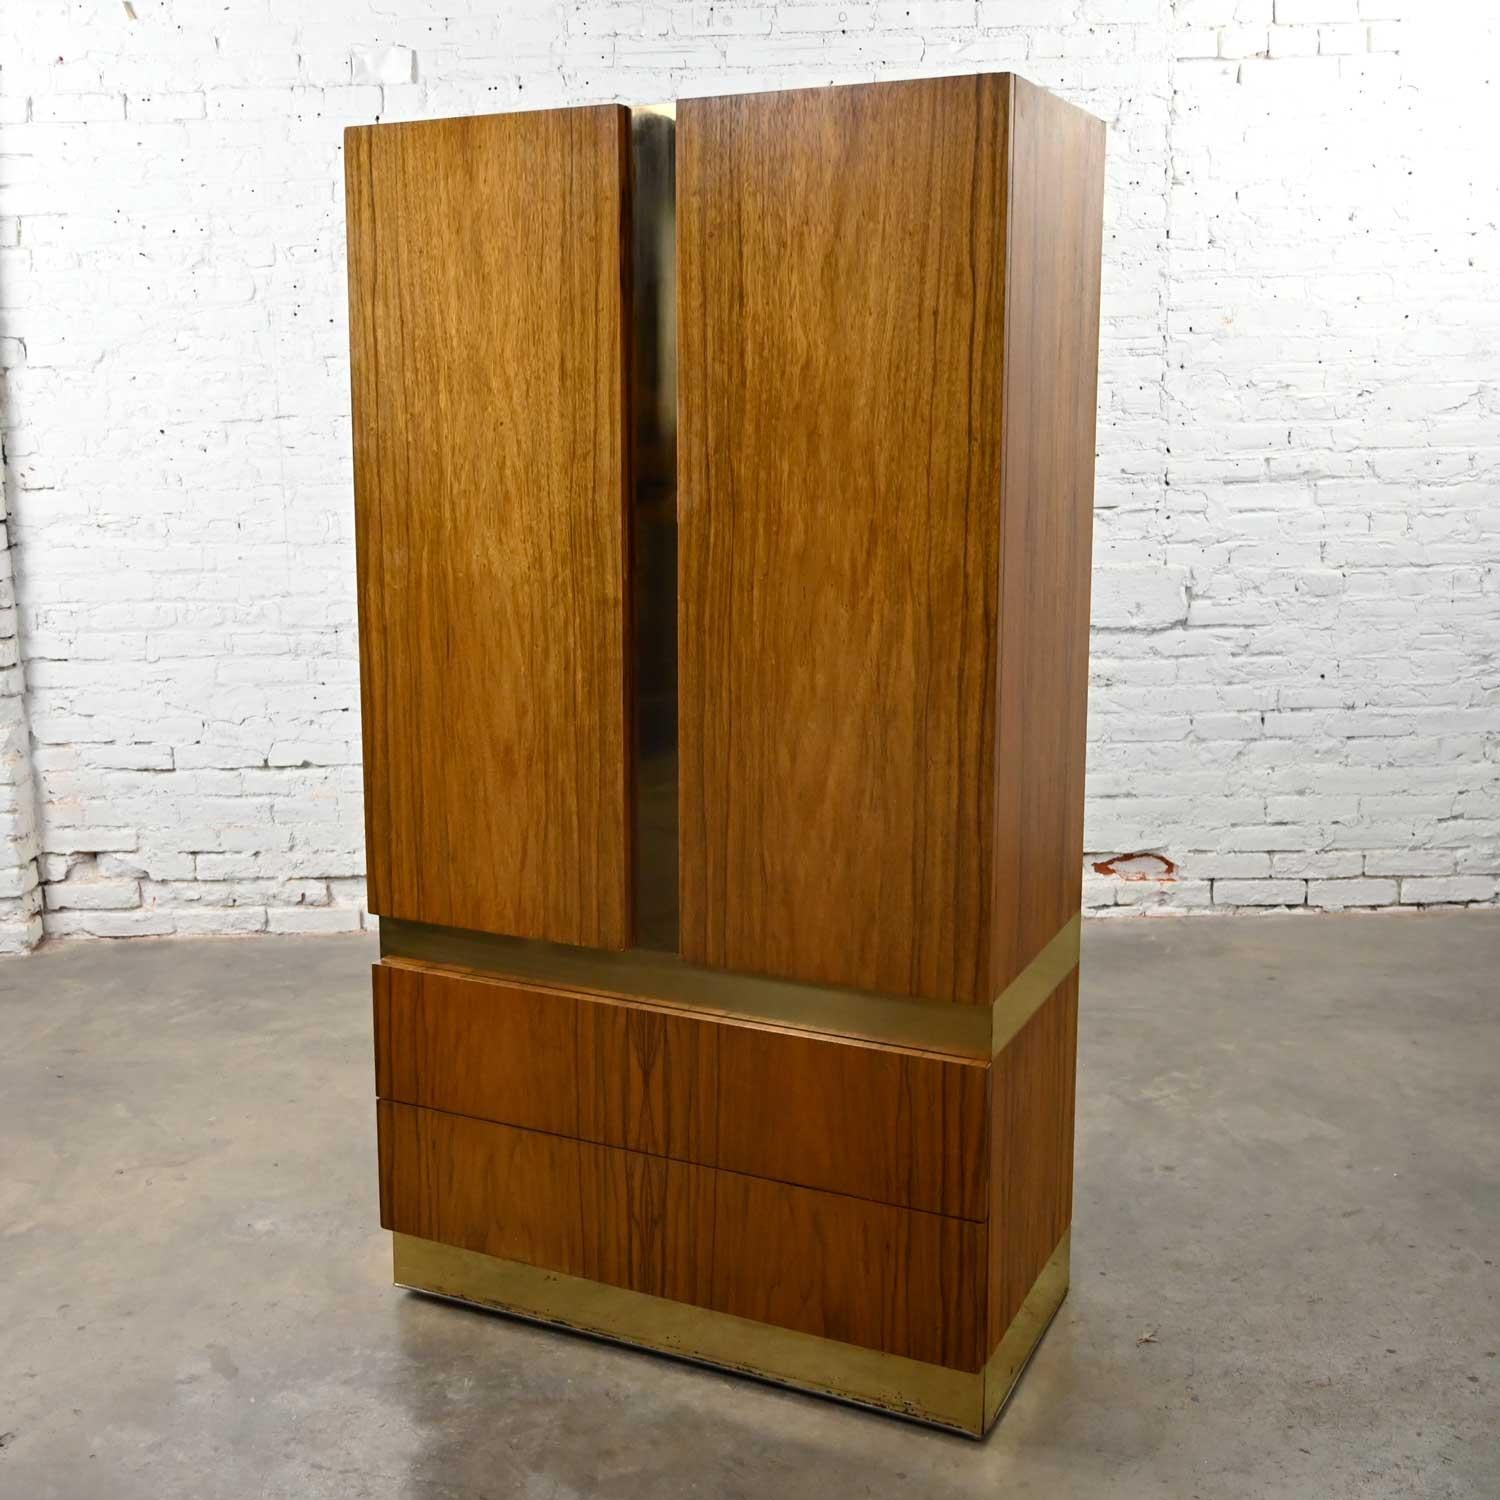 Phenomenal vintage modern rosewood & brass plate wardrobe or chifforobe by Milo Baughman for Thayer Coggin. Comprised of gorgeous rosewood veneer and brass plated steel bands. Beautiful condition, keeping in mind that this is vintage and not new so